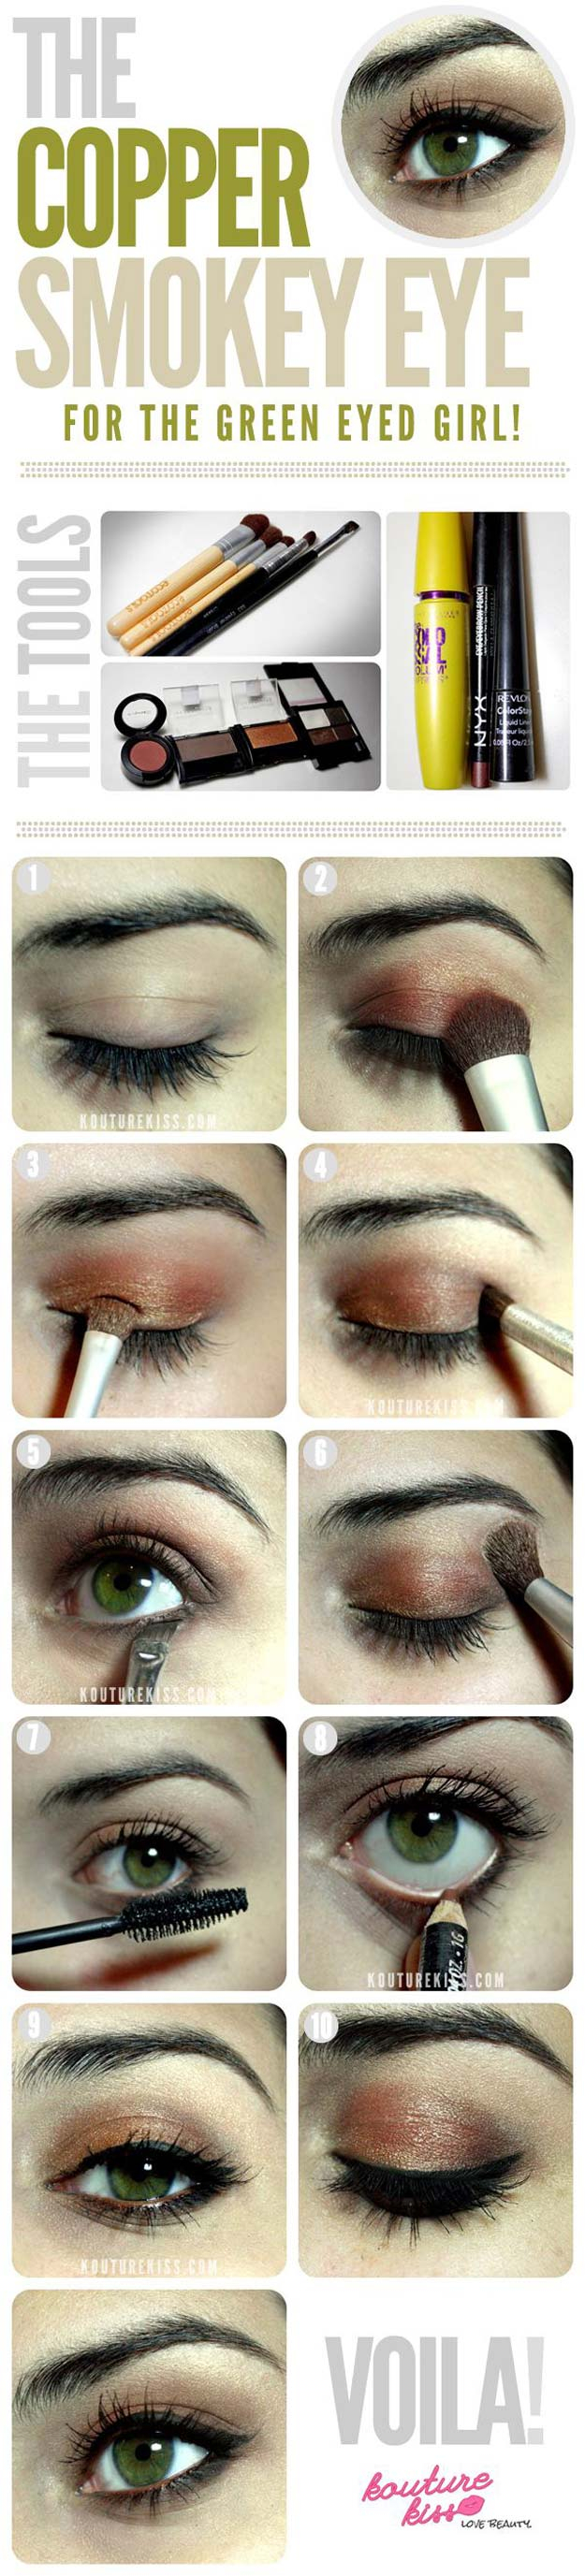 Prom Makeup For Blue Eyes 38 Makeup Ideas For Prom The Goddess